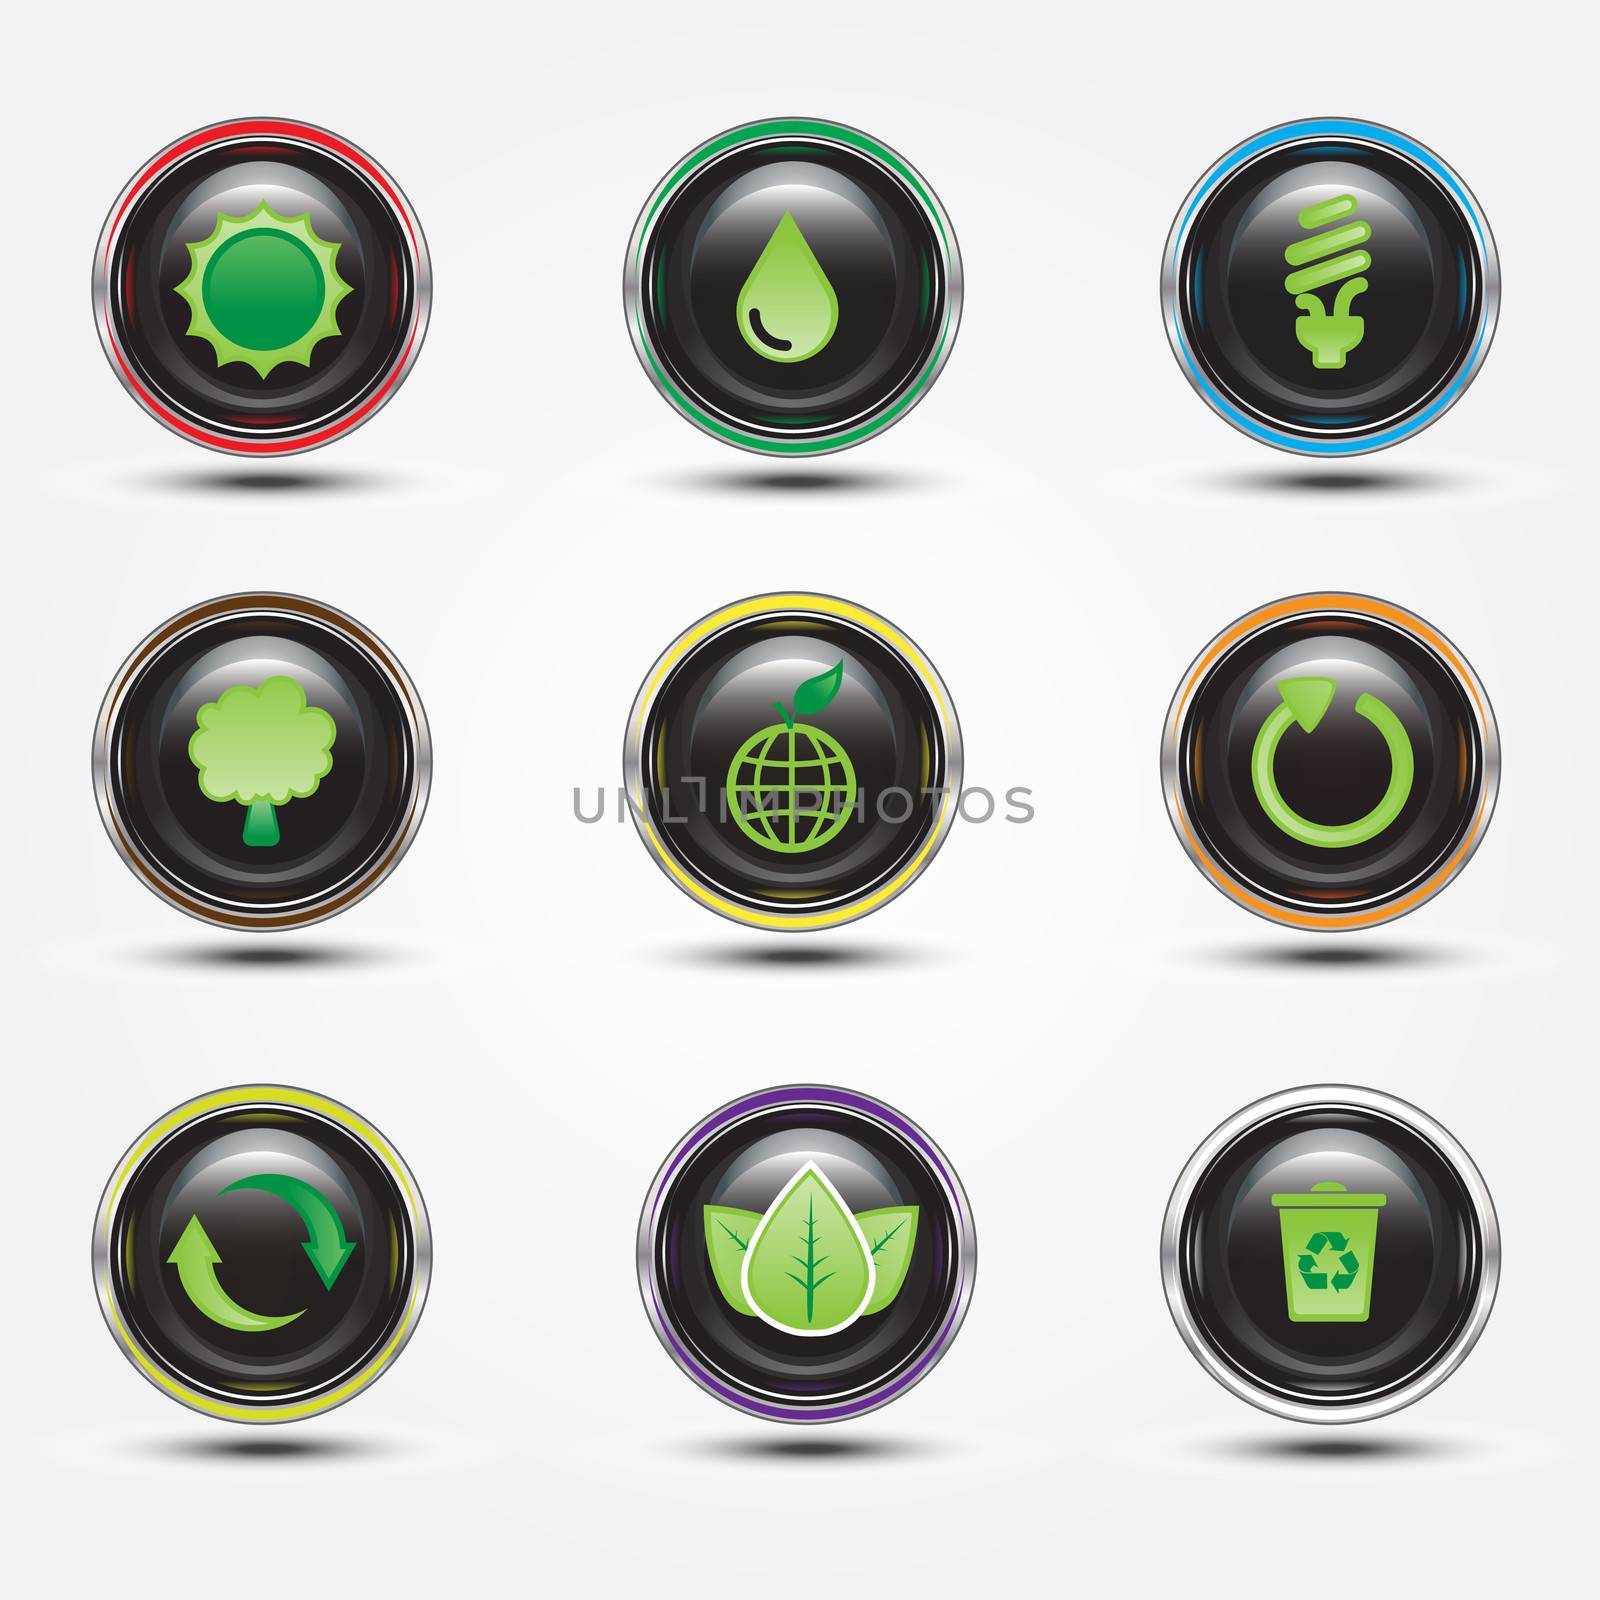 eco sign and symbols on glossy button